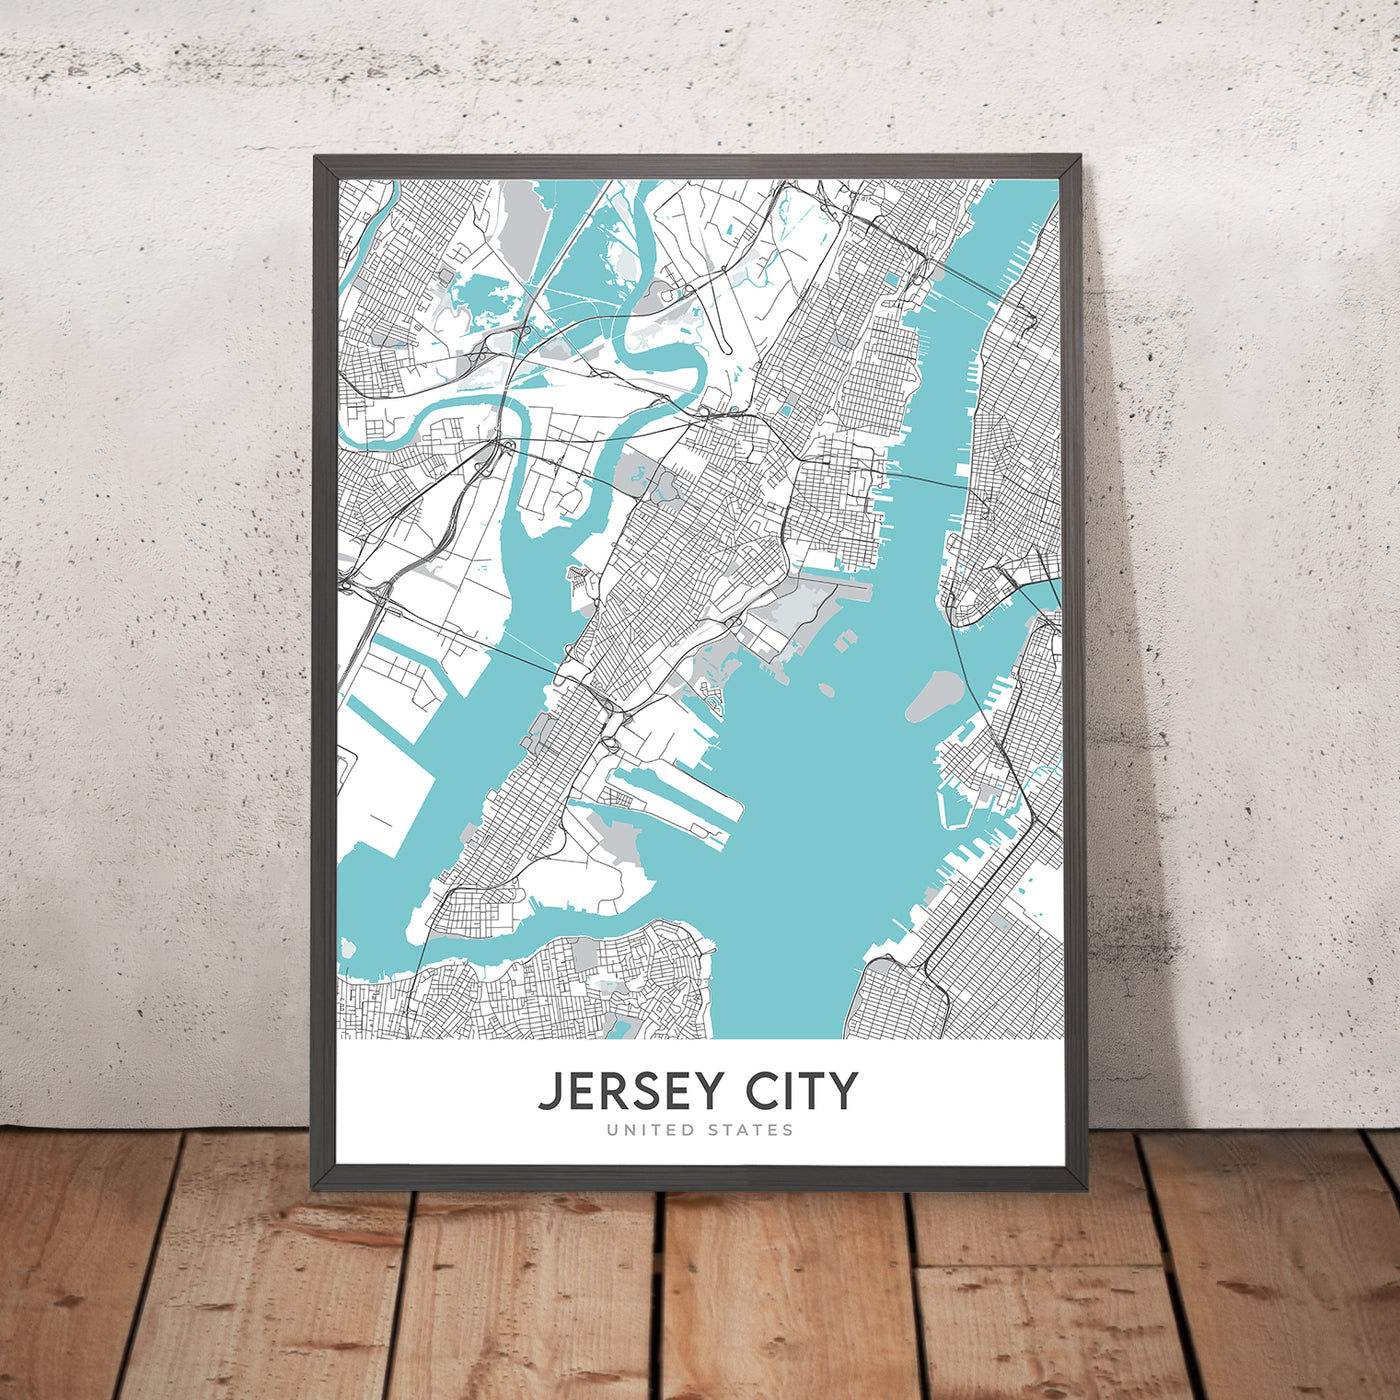 Modern City Map of Jersey City, NJ: Bergen-Lafayette, Liberty State Park, Statue of Liberty, Journal Square, Exchange Place